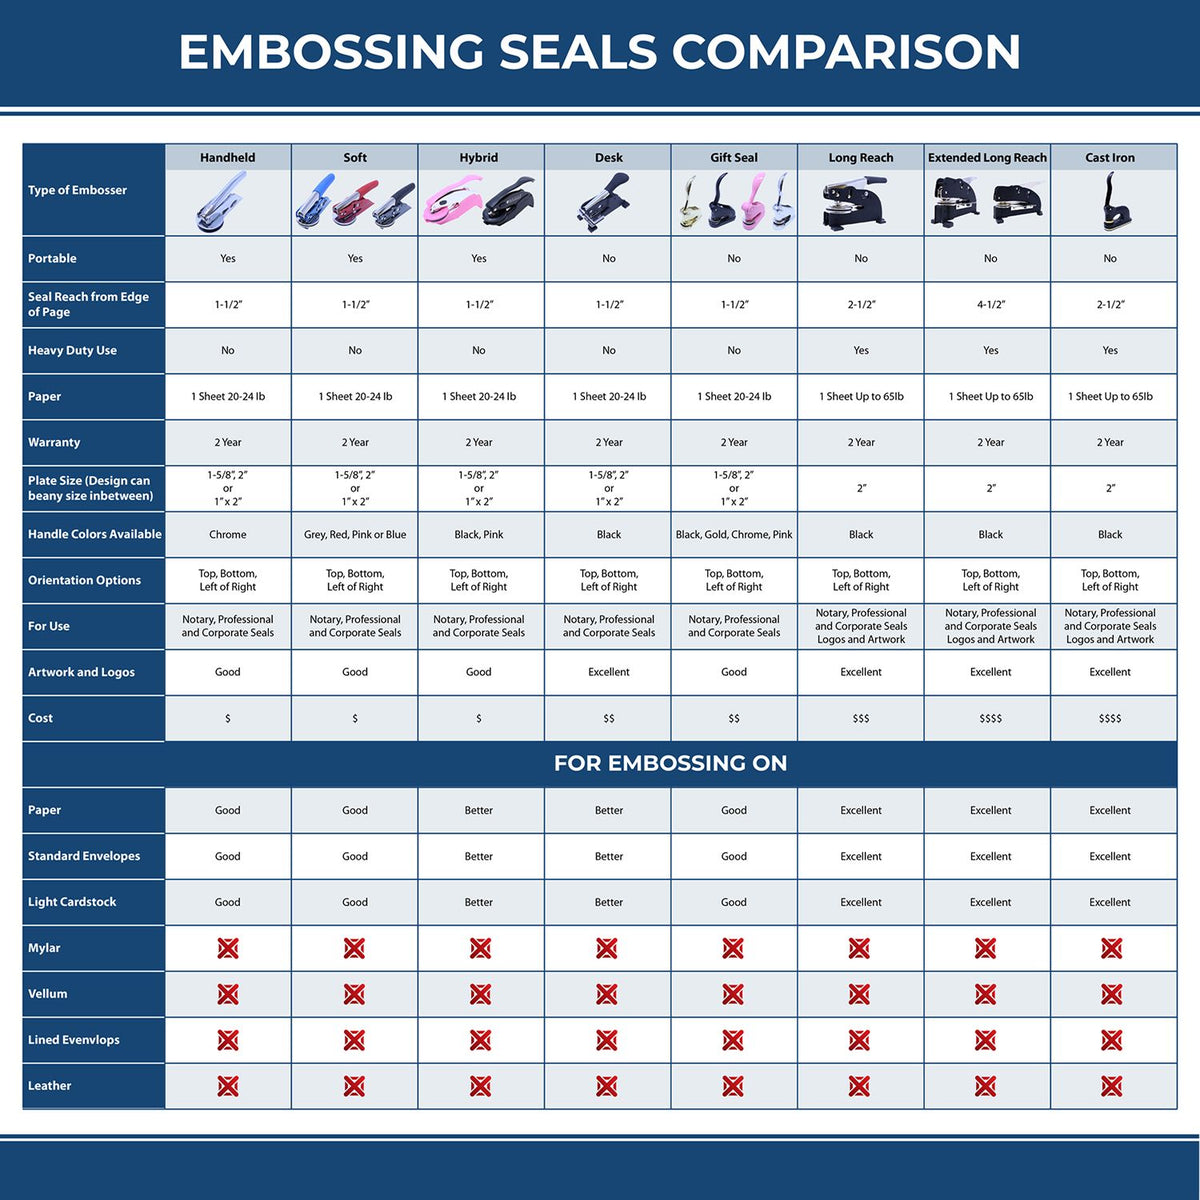 A comparison chart for the different types of mount models available for the Heavy Duty Cast Iron Rhode Island Architect Embosser.